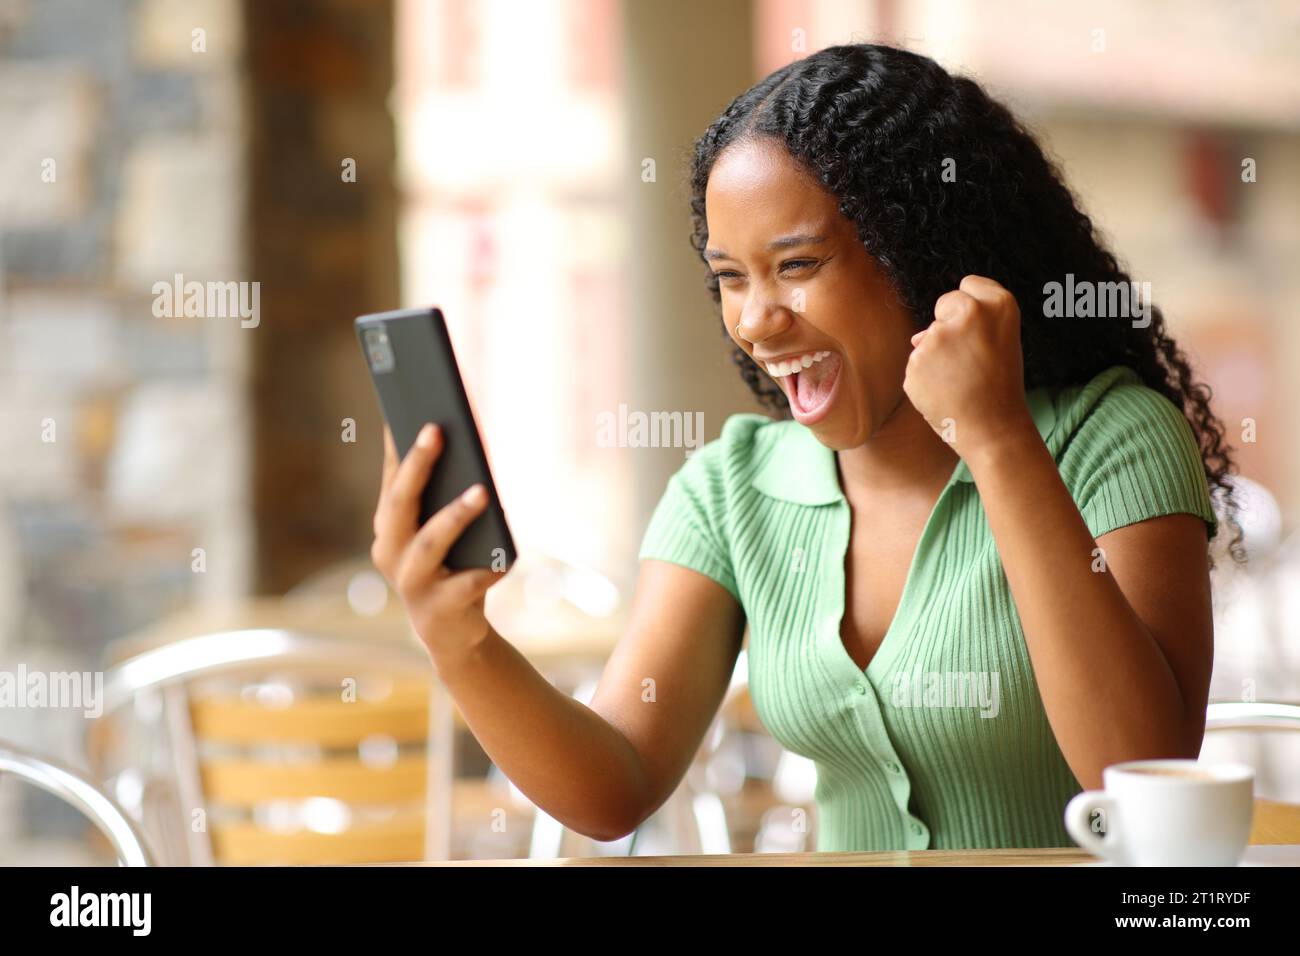 Excited black woman checking smart phone in a bar terrace Stock Photo